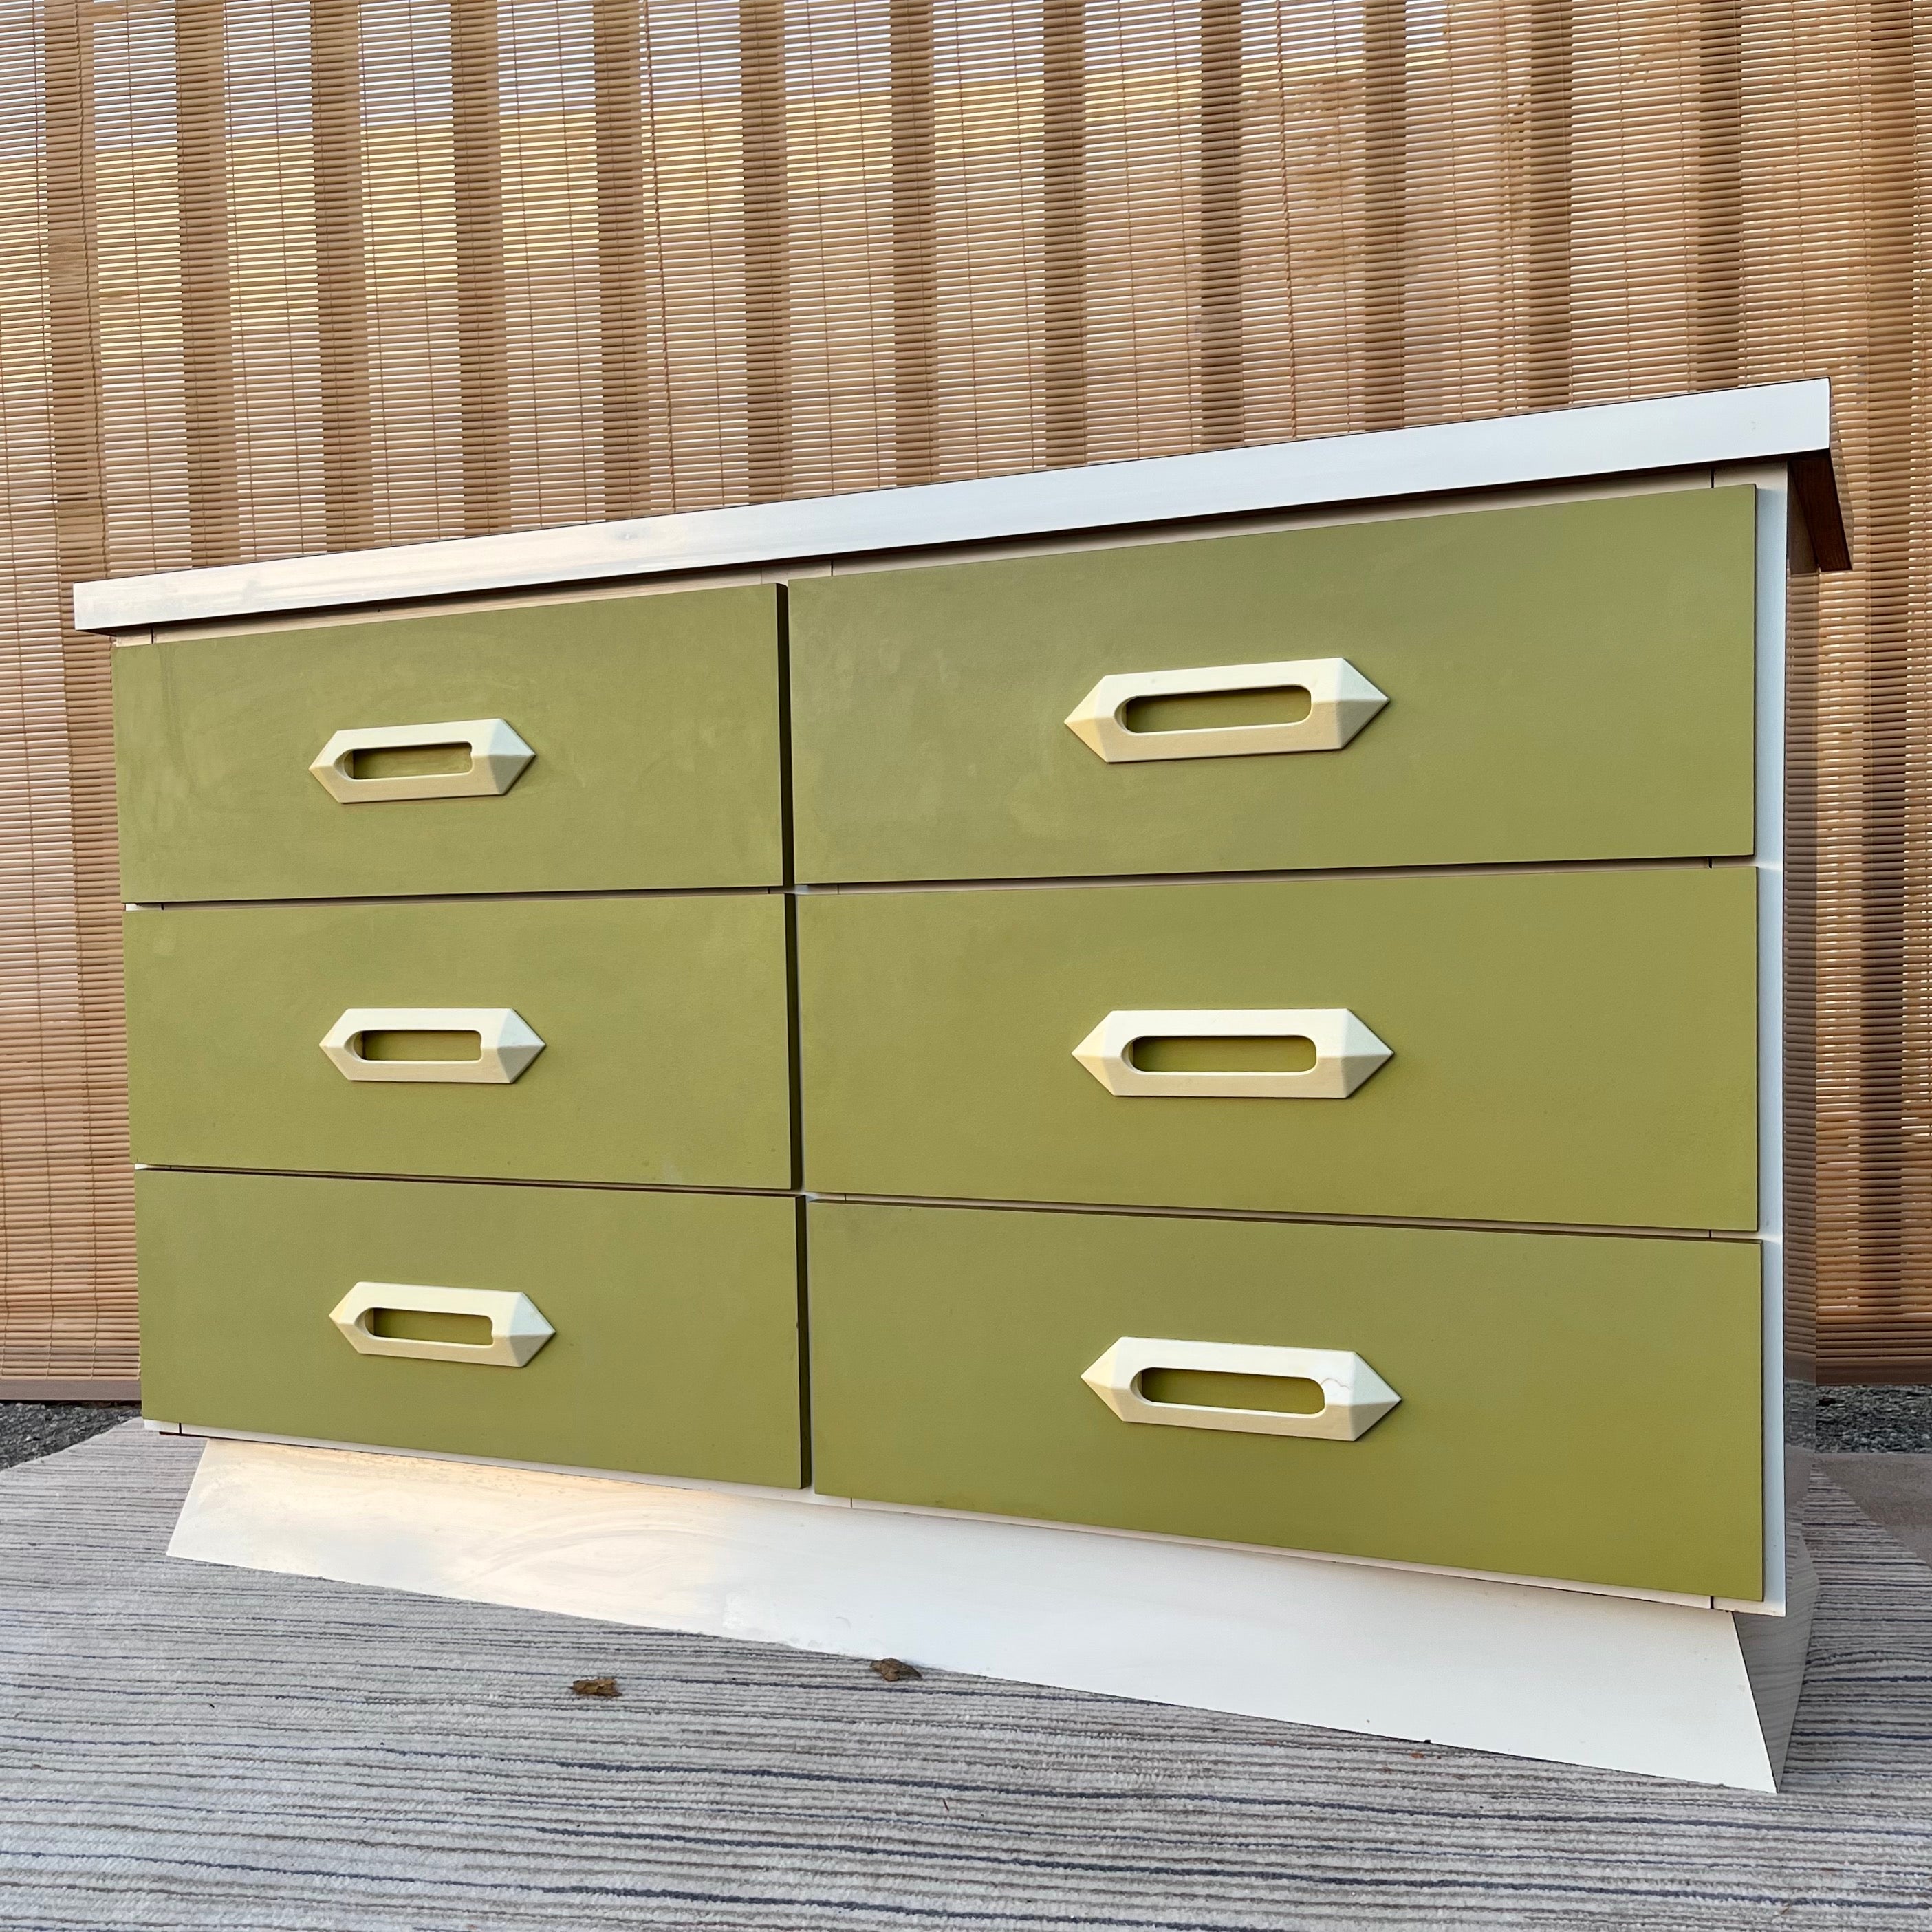 Vintage Mid Century Modern Laminated Compact Dresser. Circa 1960s
Features a compact size perfect for any space limited area, six drawers laminated with avocado green formica with off white plastic handles, and a body and base laminated with a